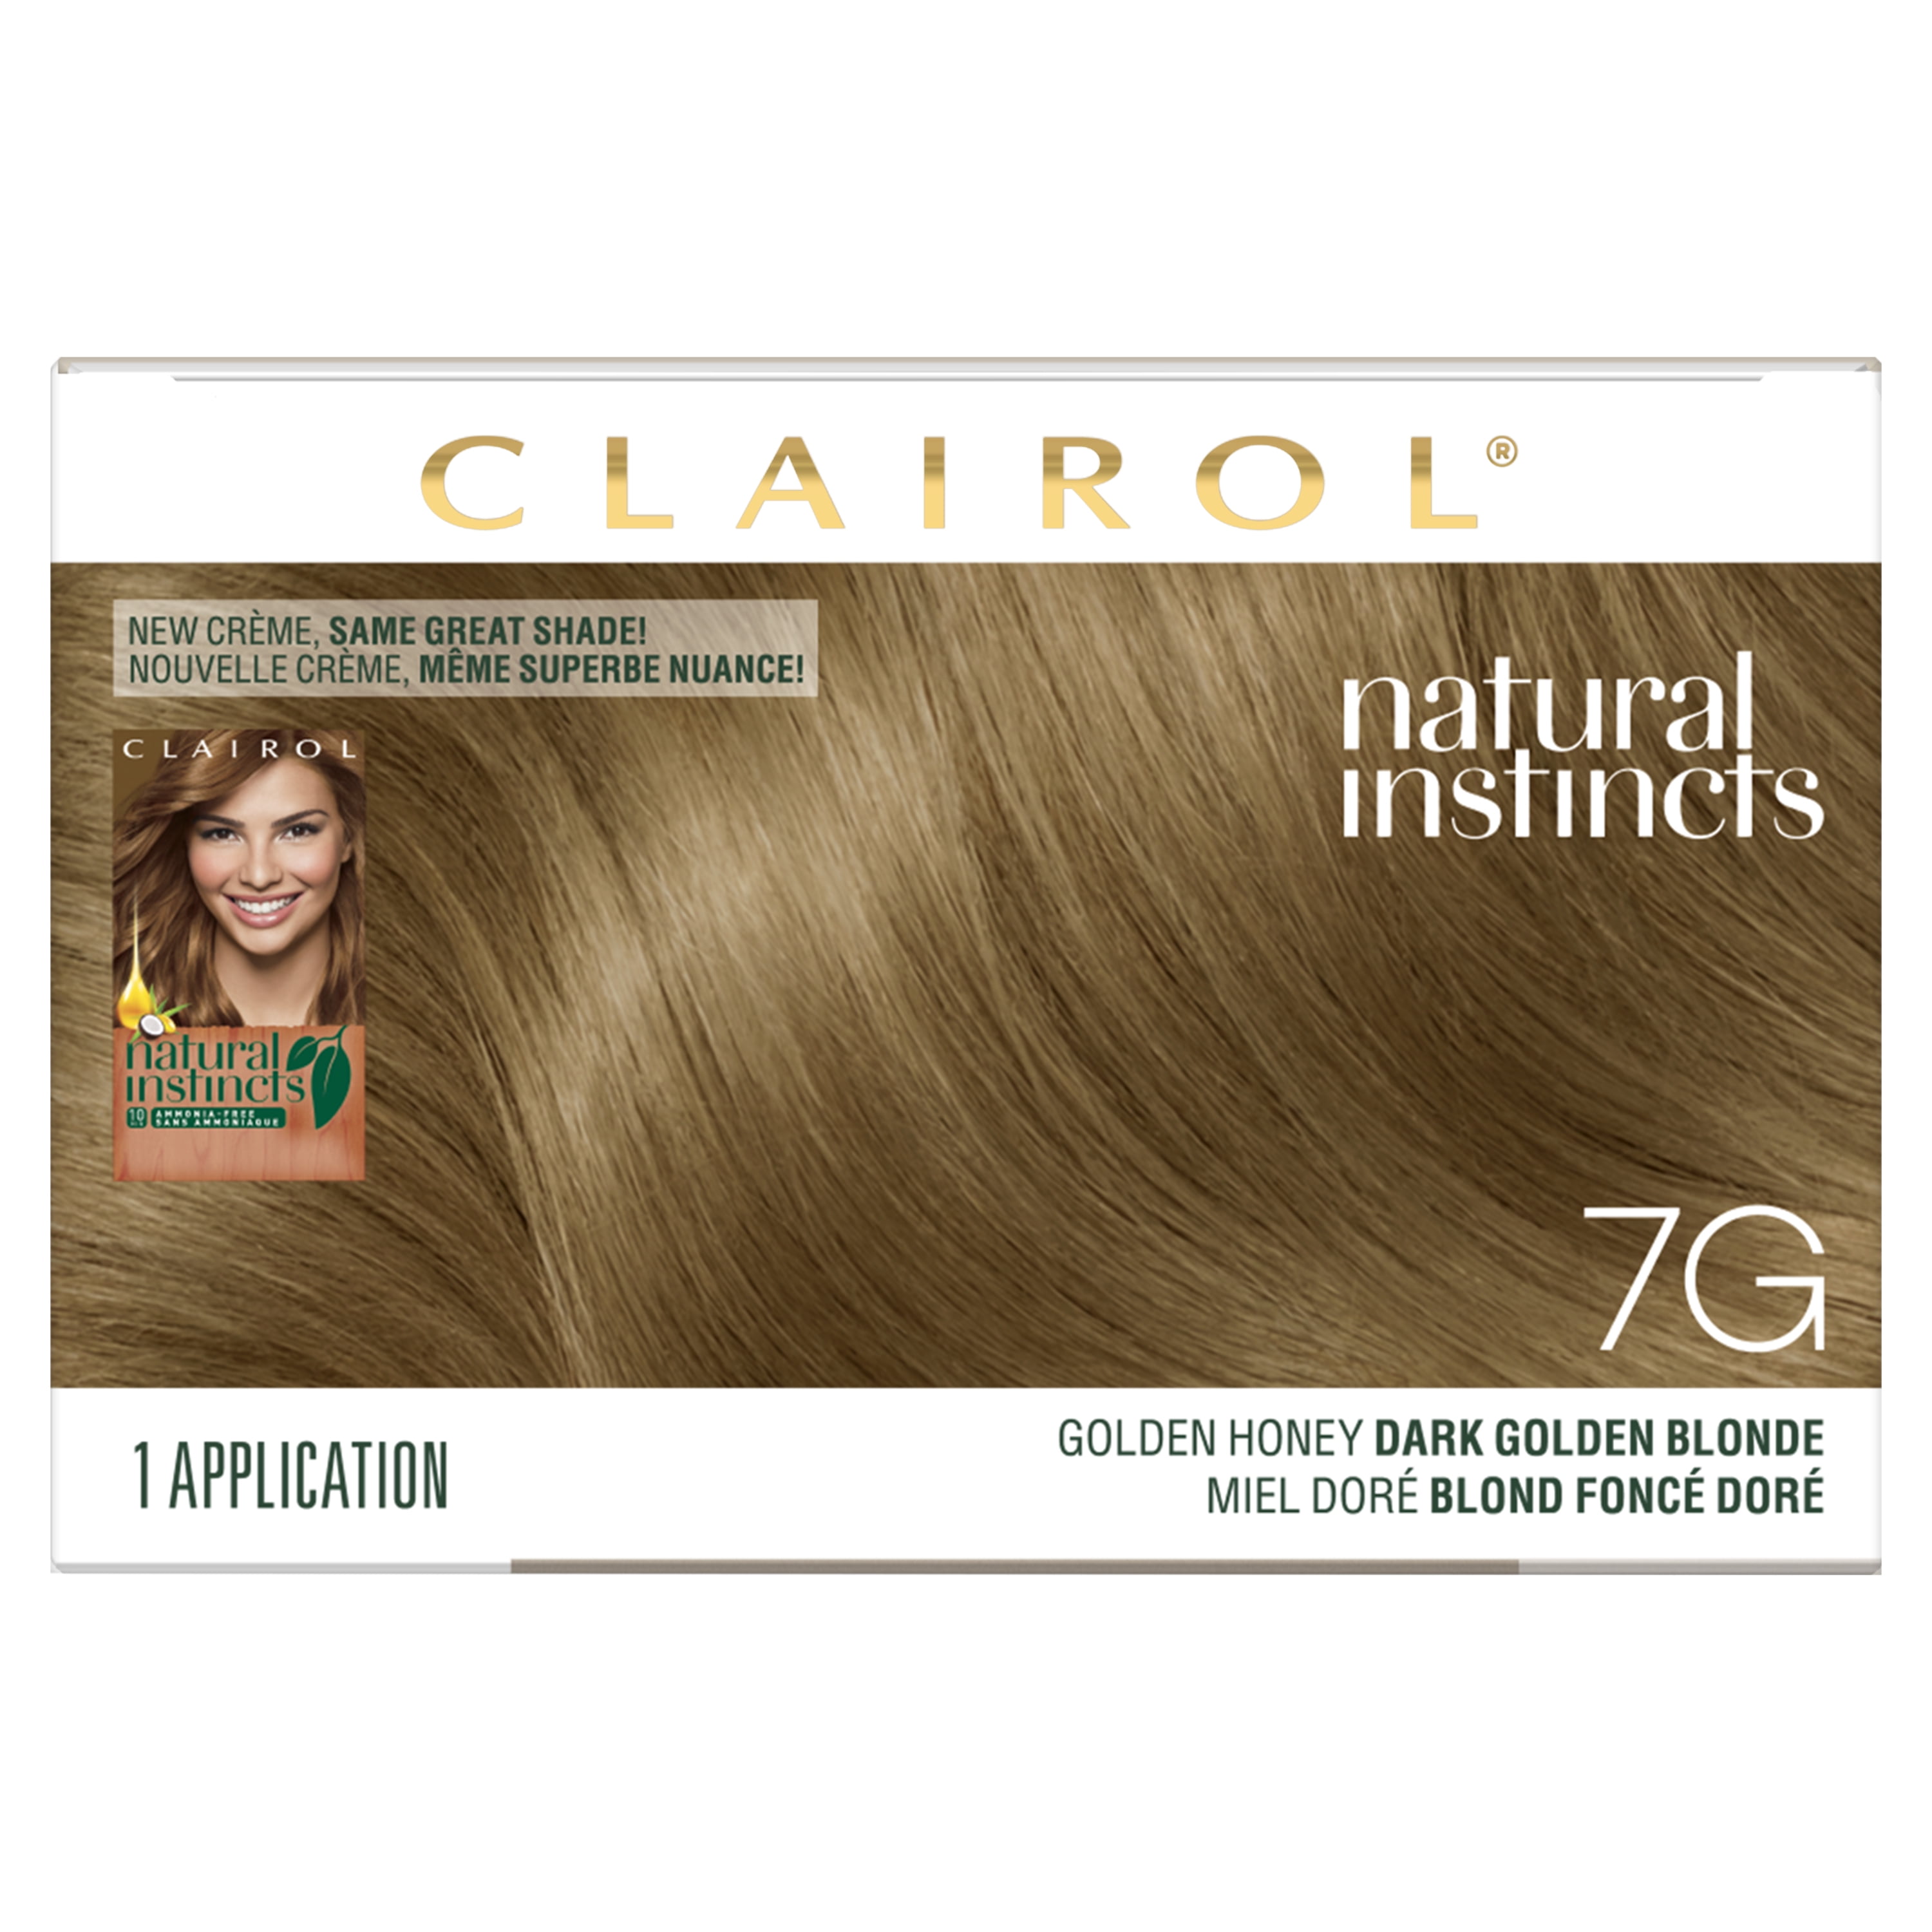 Clairol Natural Instincts Color Chart Sarta Innovations2019 Org